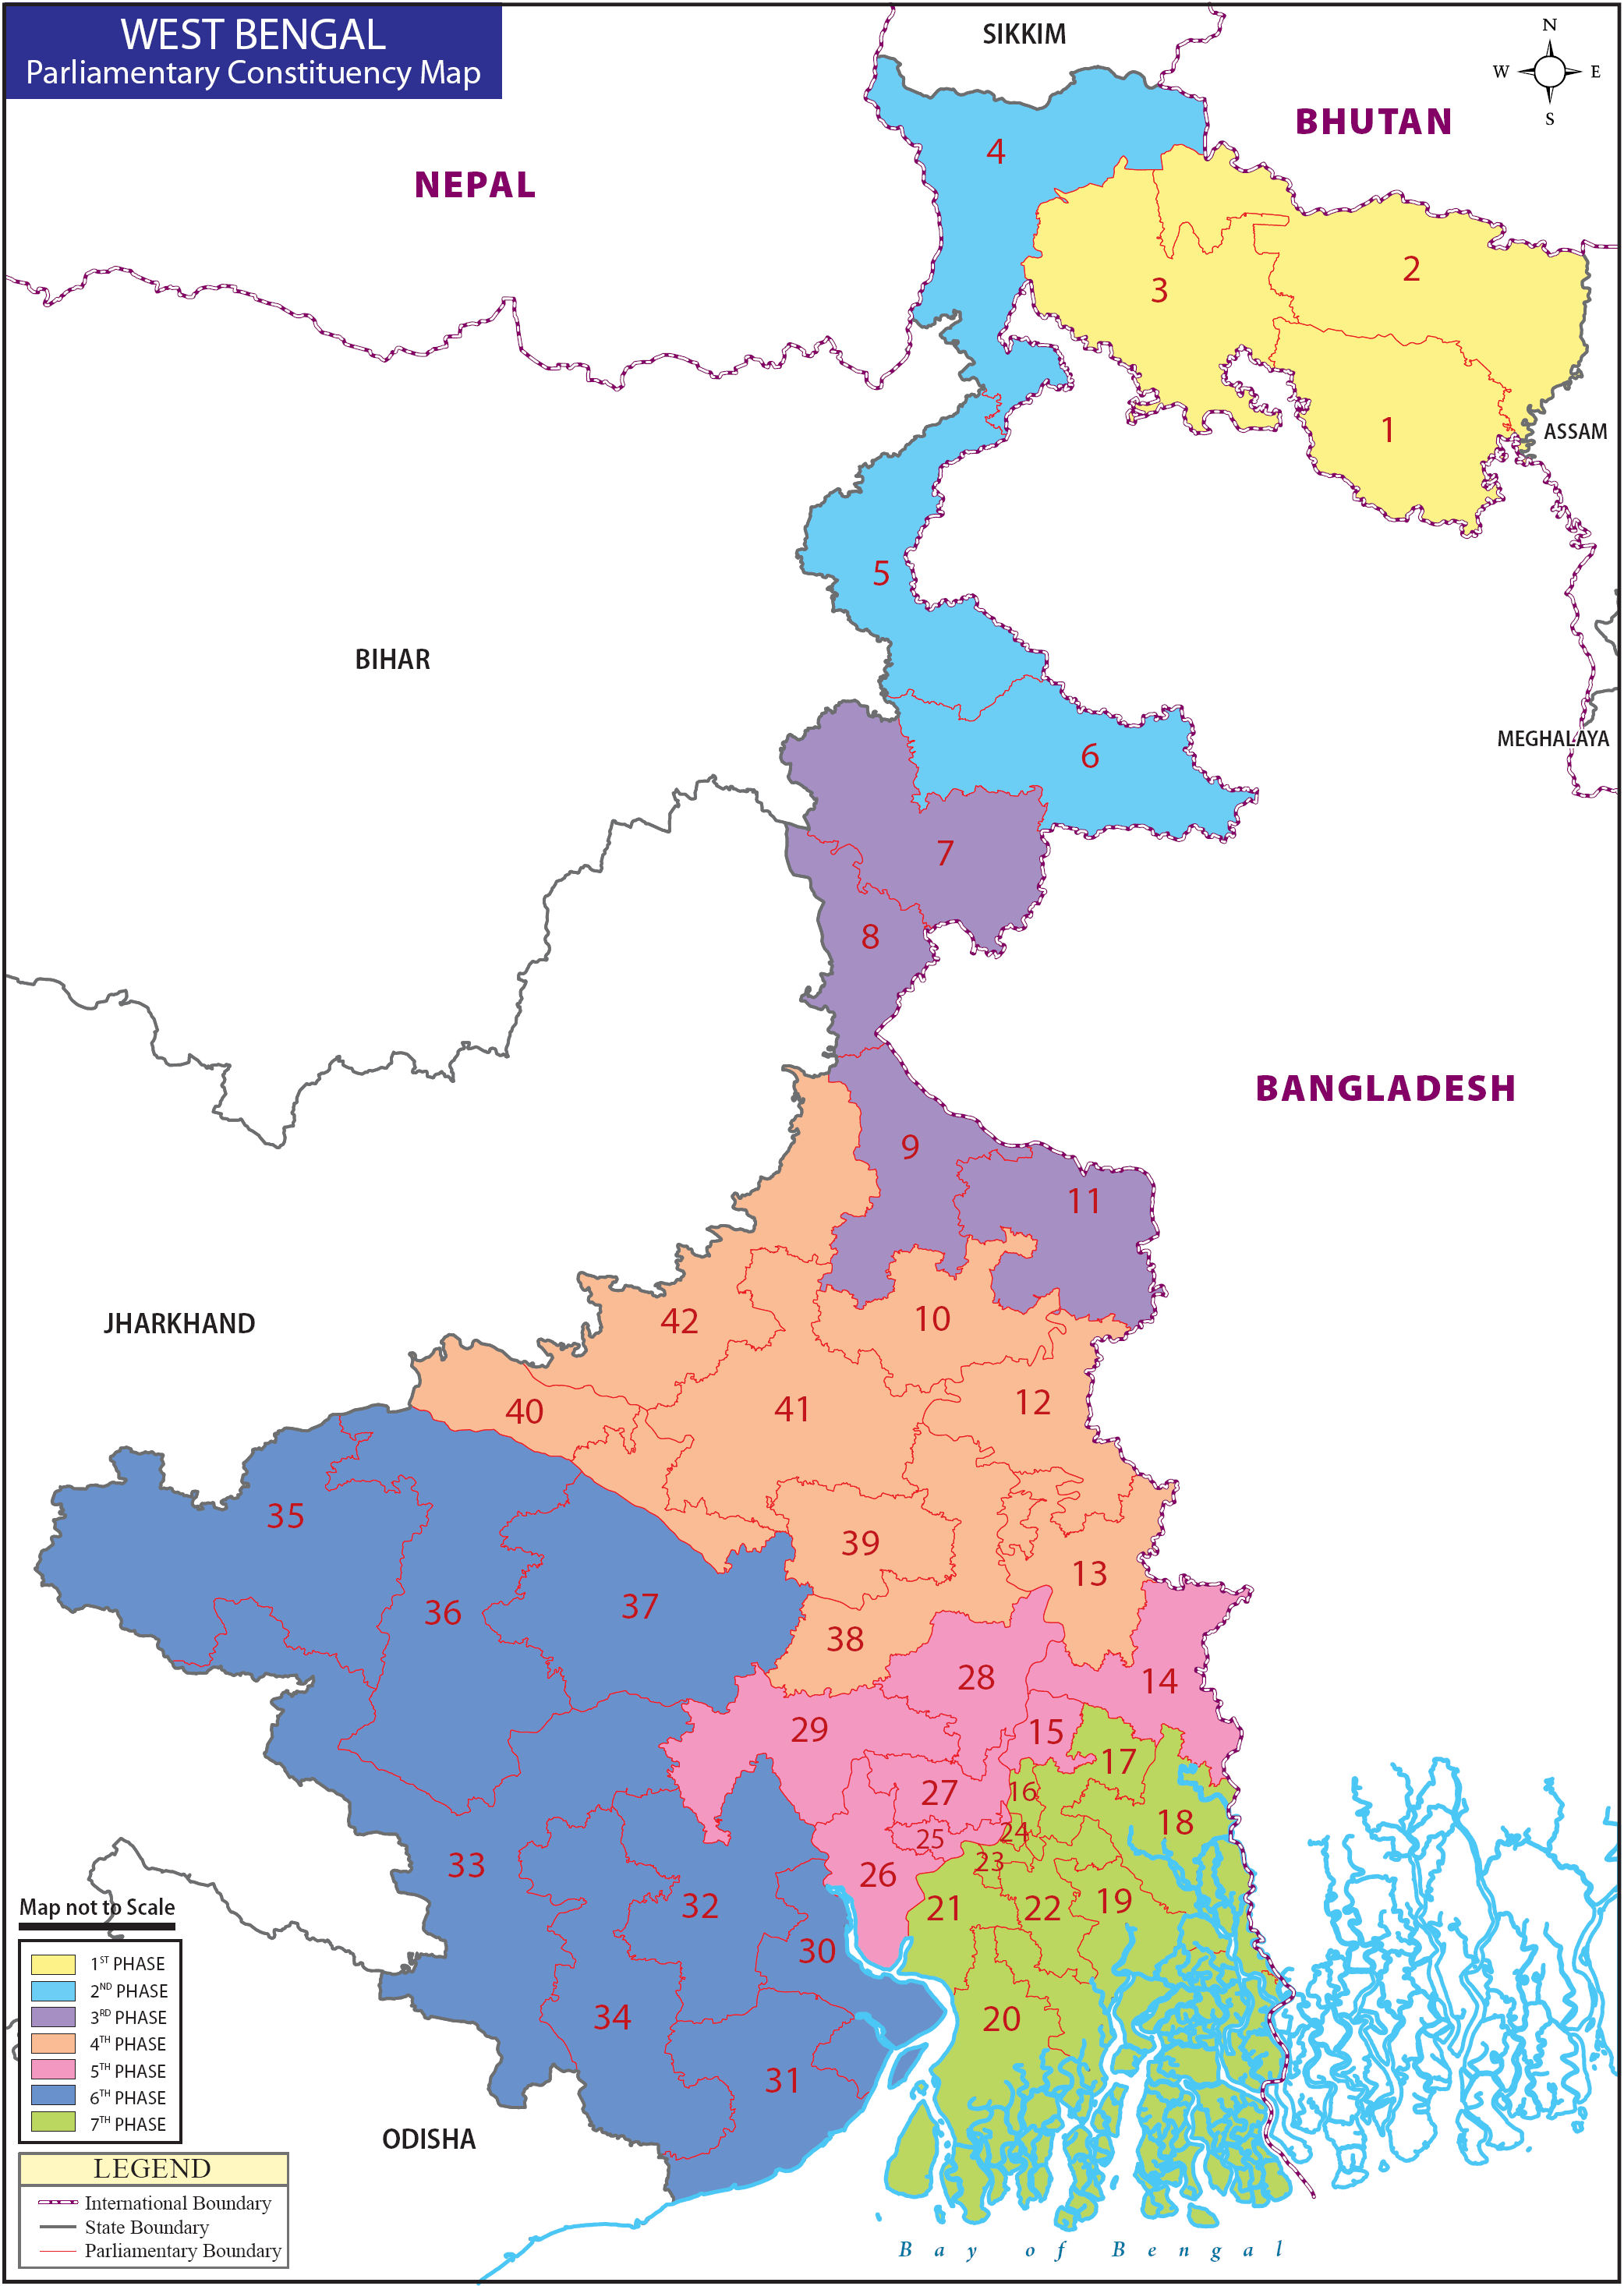 West Bengal Parliamentary Constituency Map